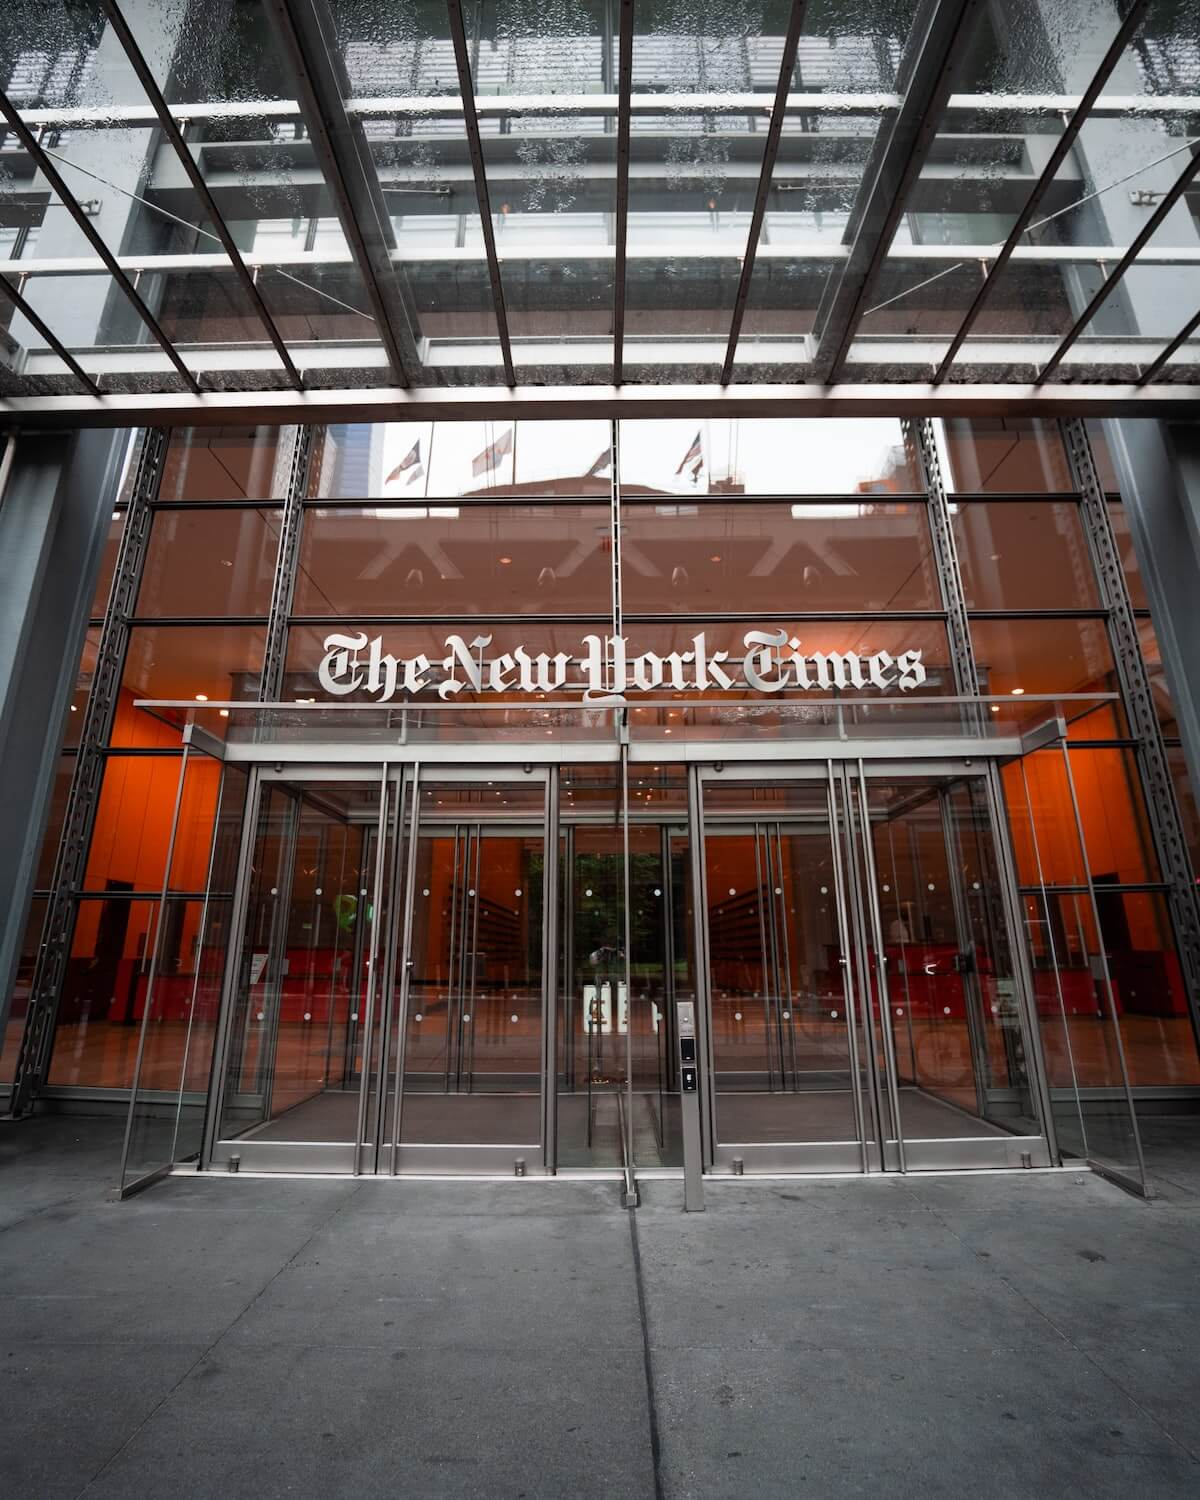 The front doors of The New York Times building in New York City, USA.